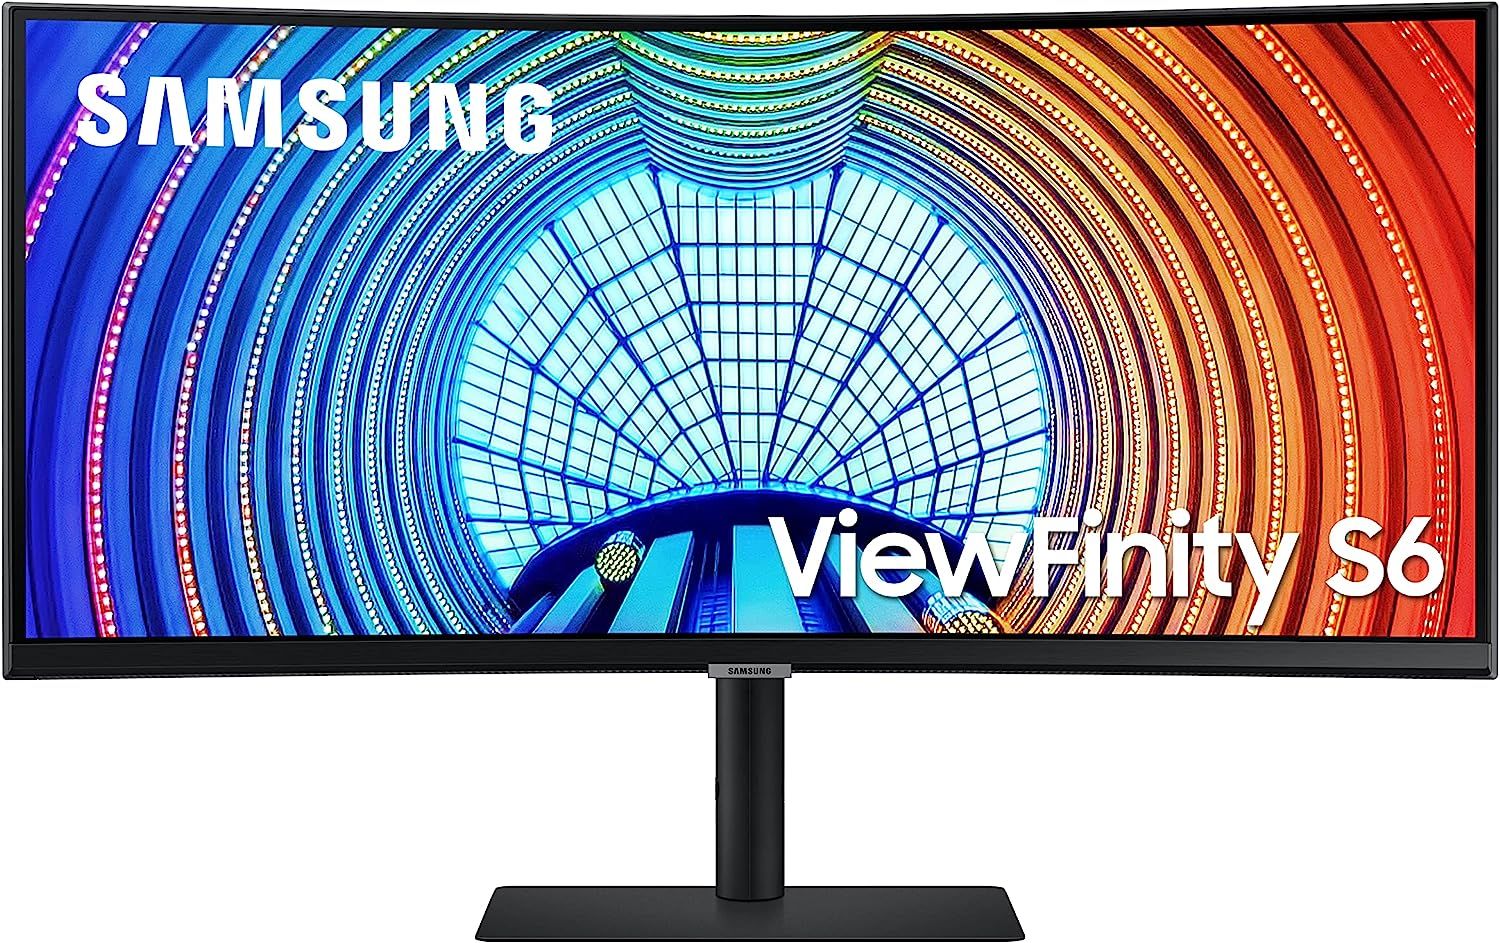 Samsung ViewFinity S6 QHD Curved Monitor